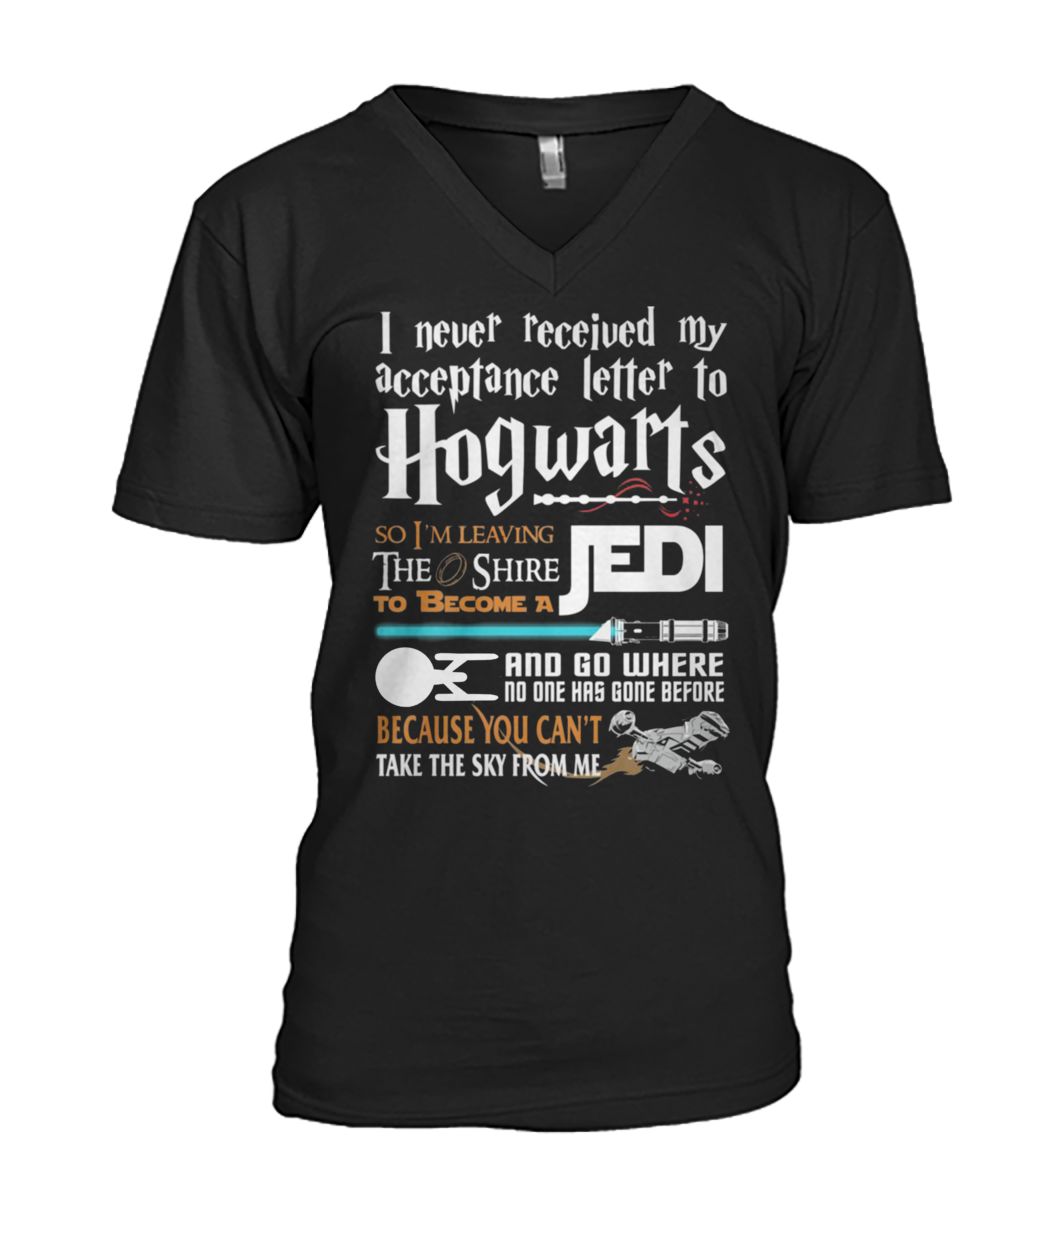 I never received my letter to hogwarts so I'm leaving the shire to become a jedi mens v-neck